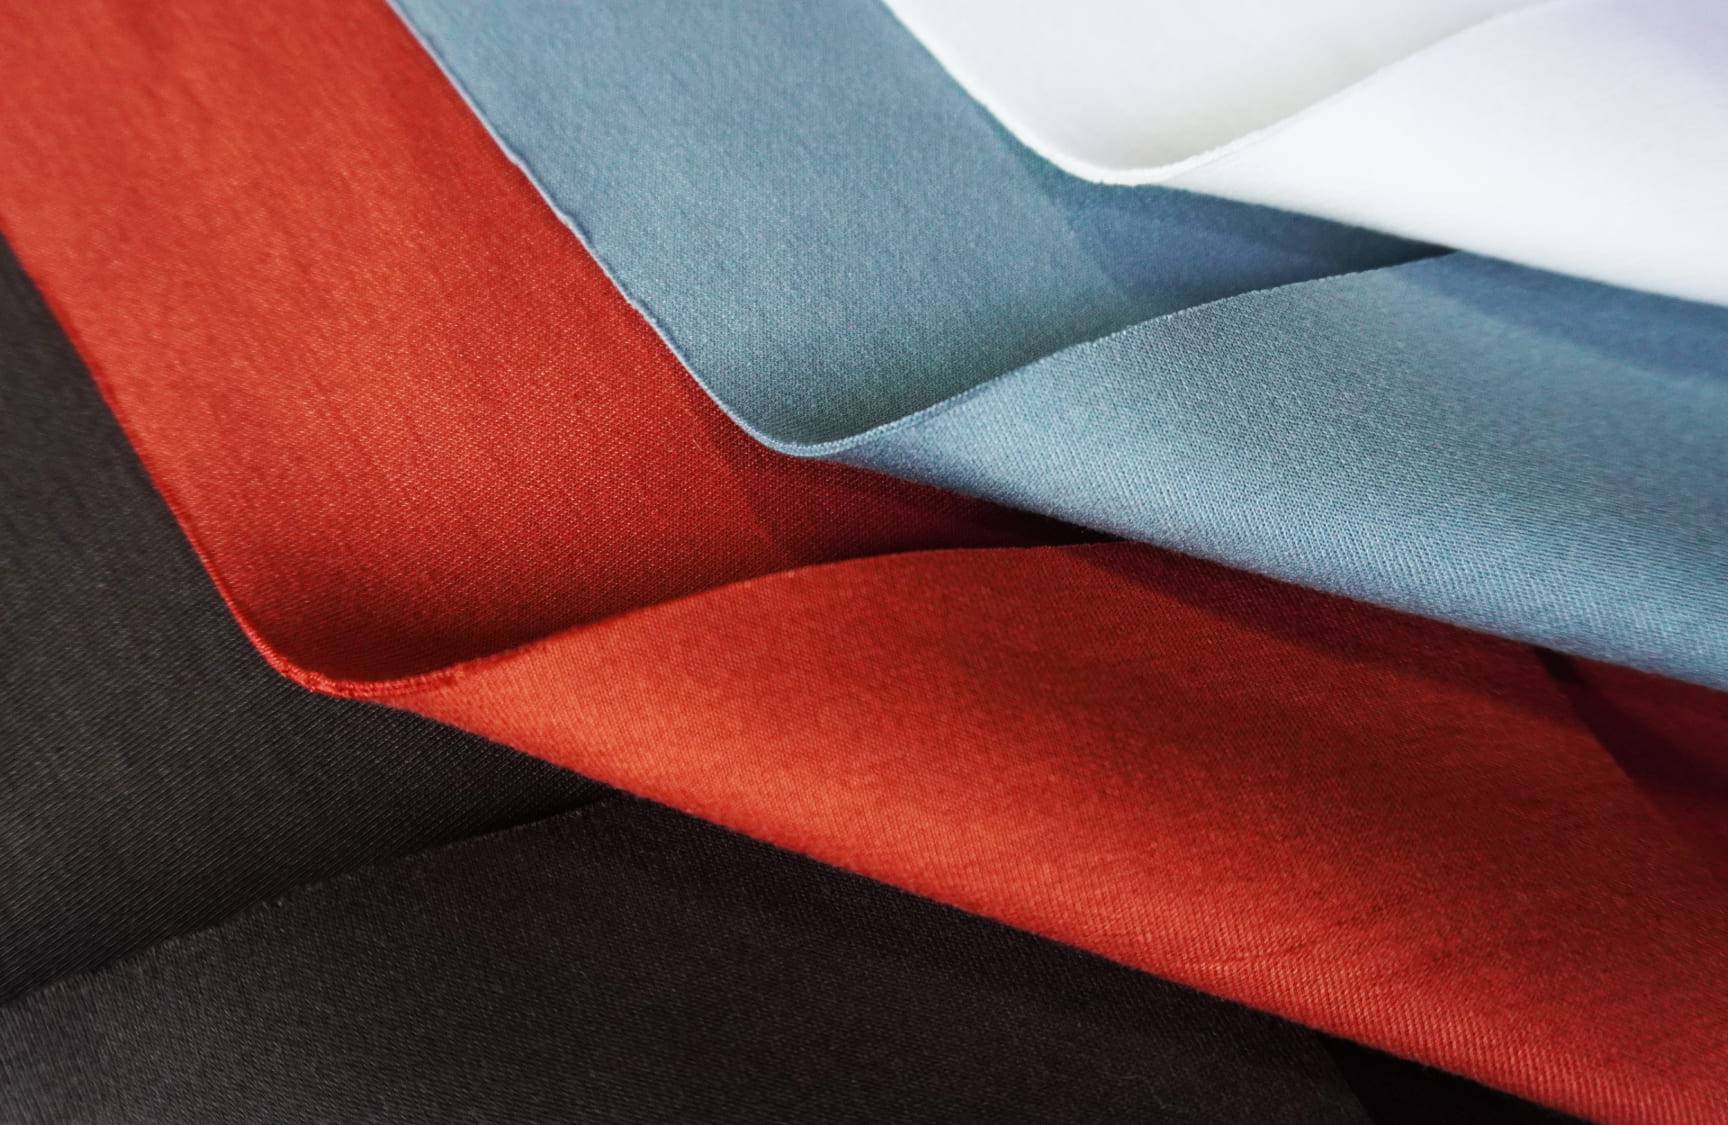 Tencel Fabric: Let's Find Out Its Specialties - Paramatex